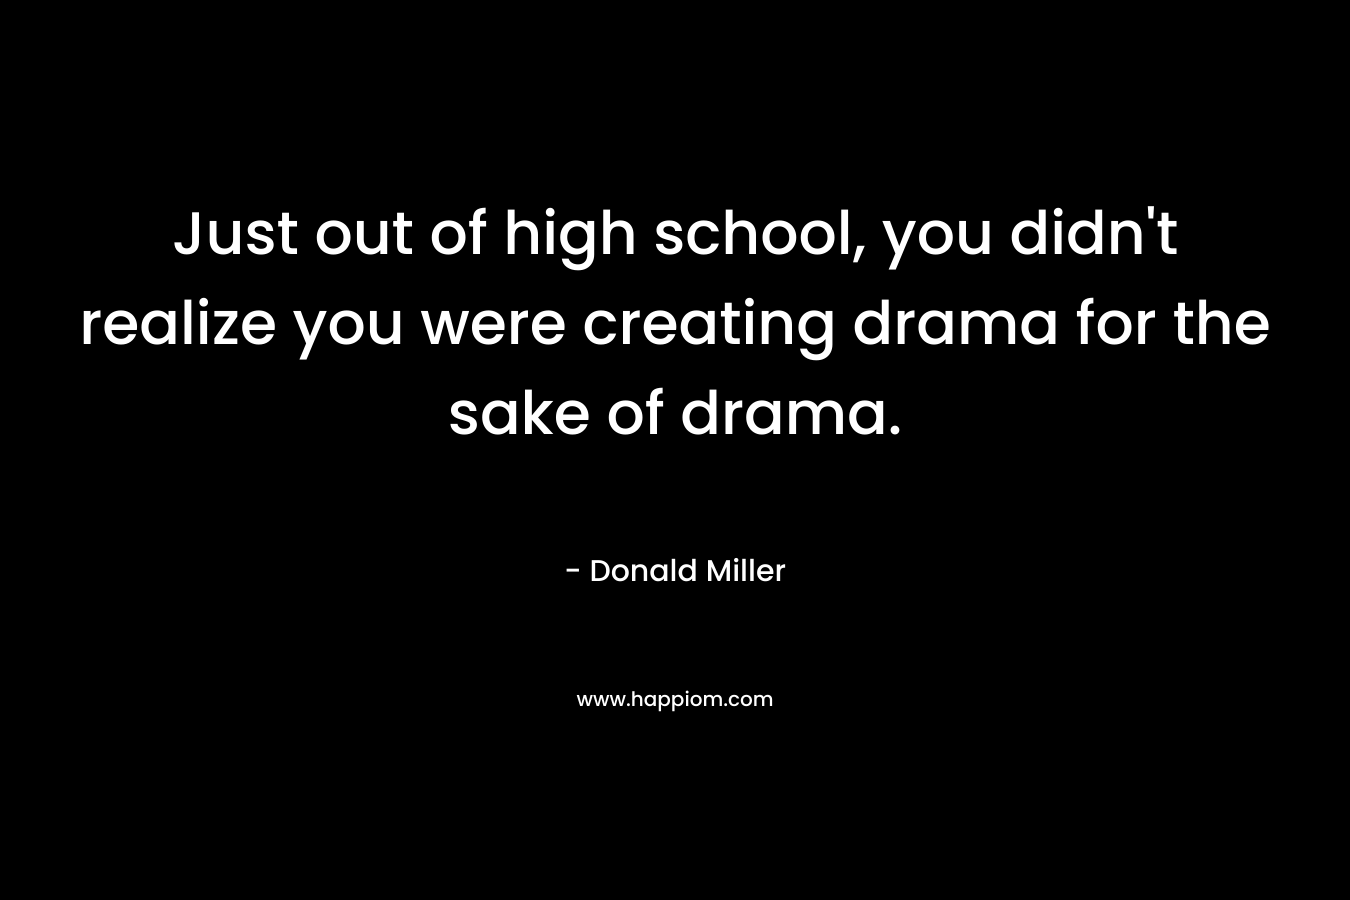 Just out of high school, you didn’t realize you were creating drama for the sake of drama. – Donald Miller